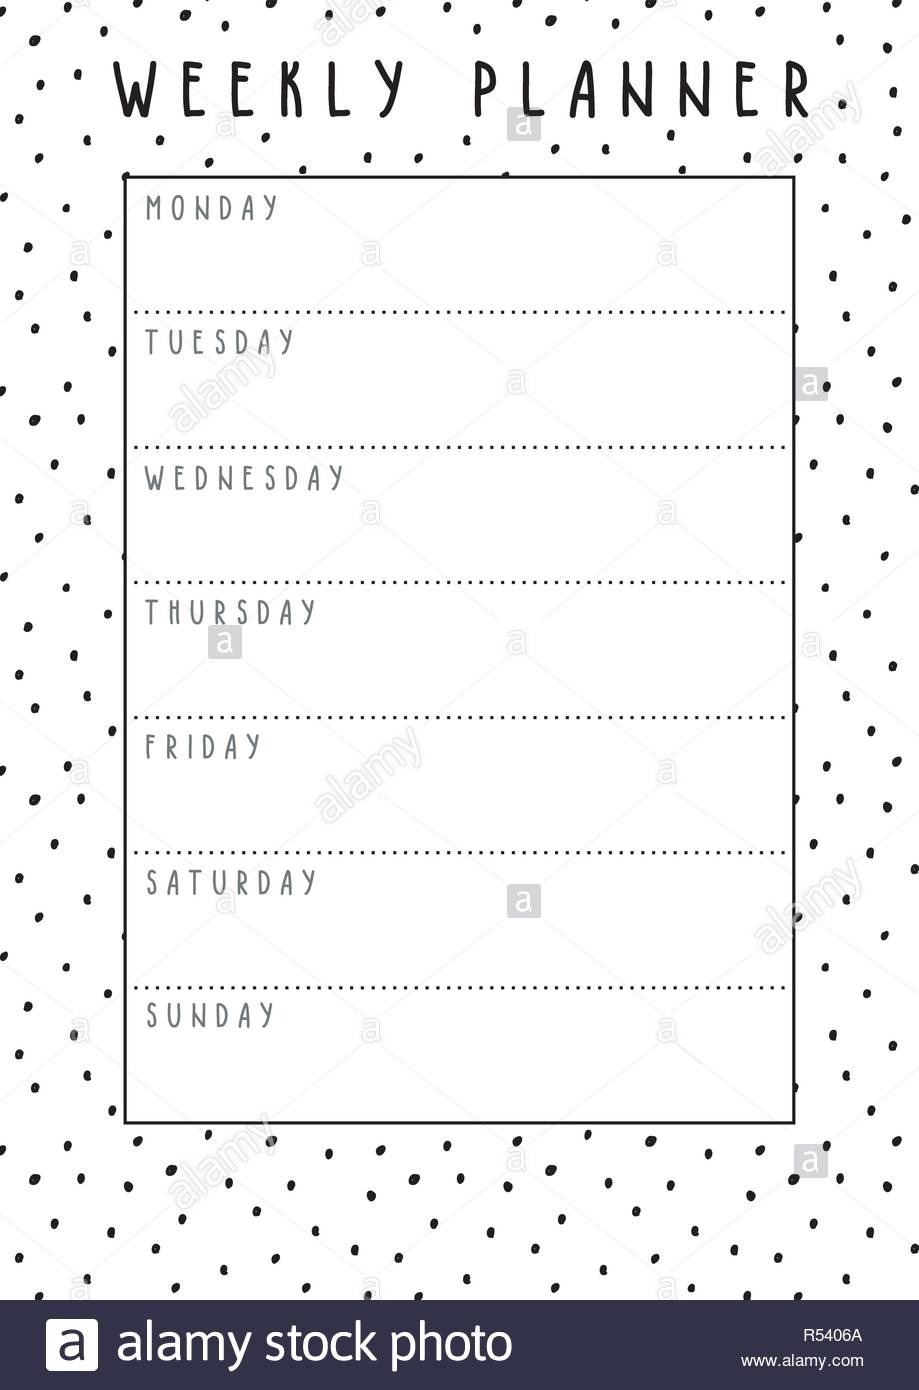 Printable Week Schedule With Hand Drawn Elements Ready To Use Stock inside Monday Through Friday Cleaning Schedule